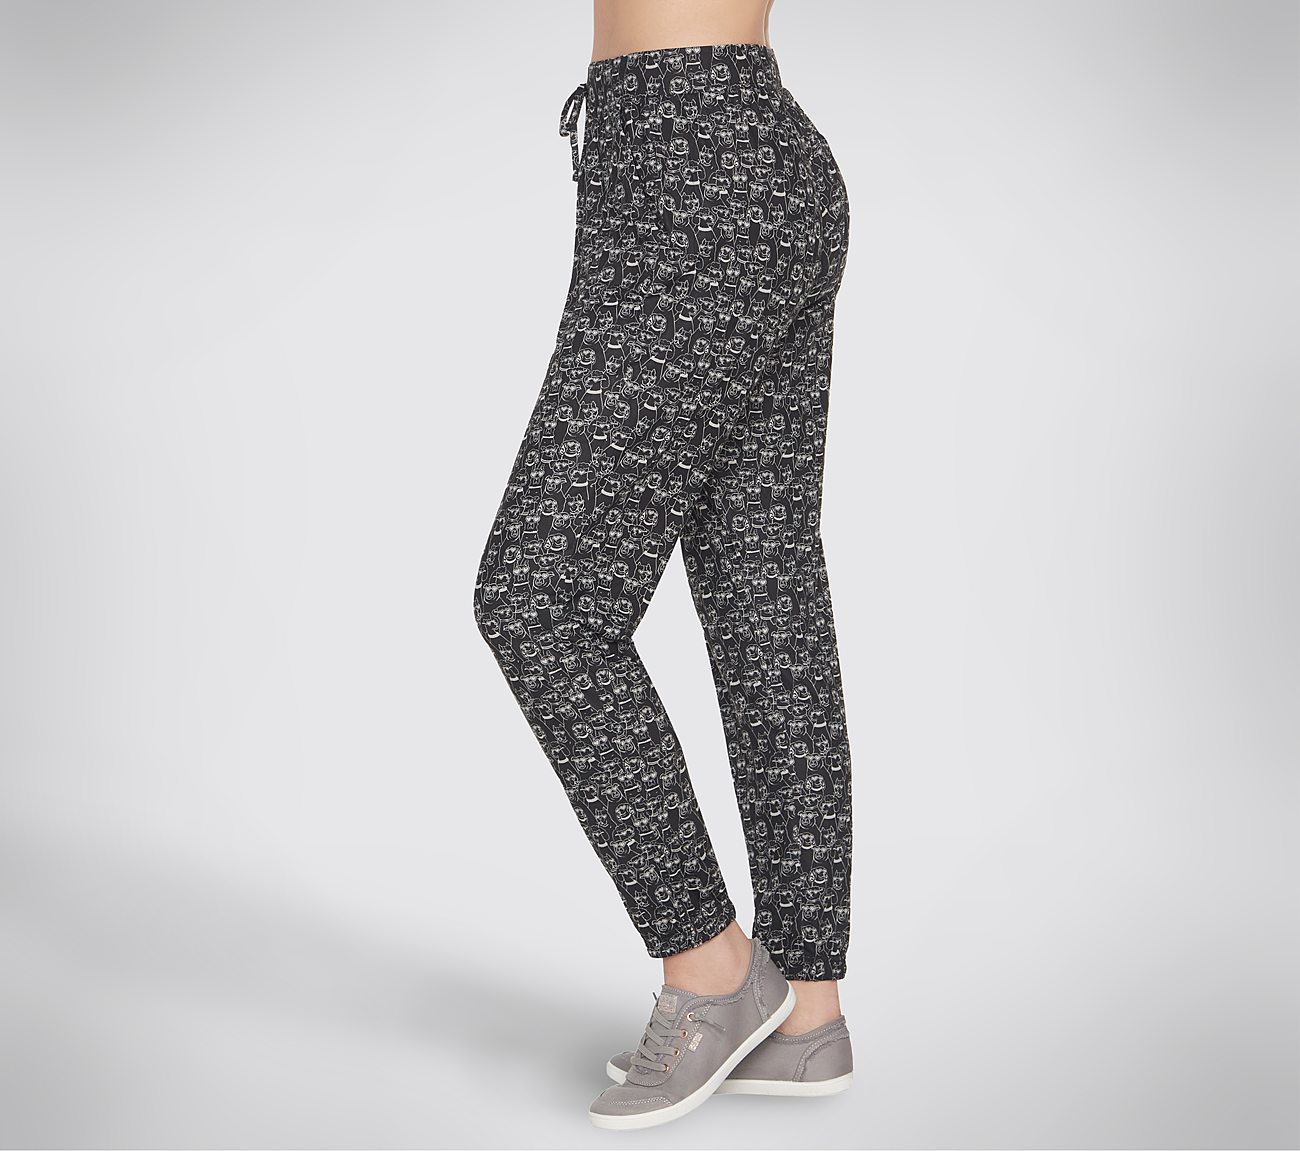 HEART EYES PEACHY PAWS JOGGER, BBBBLACK Apparels Bottom View